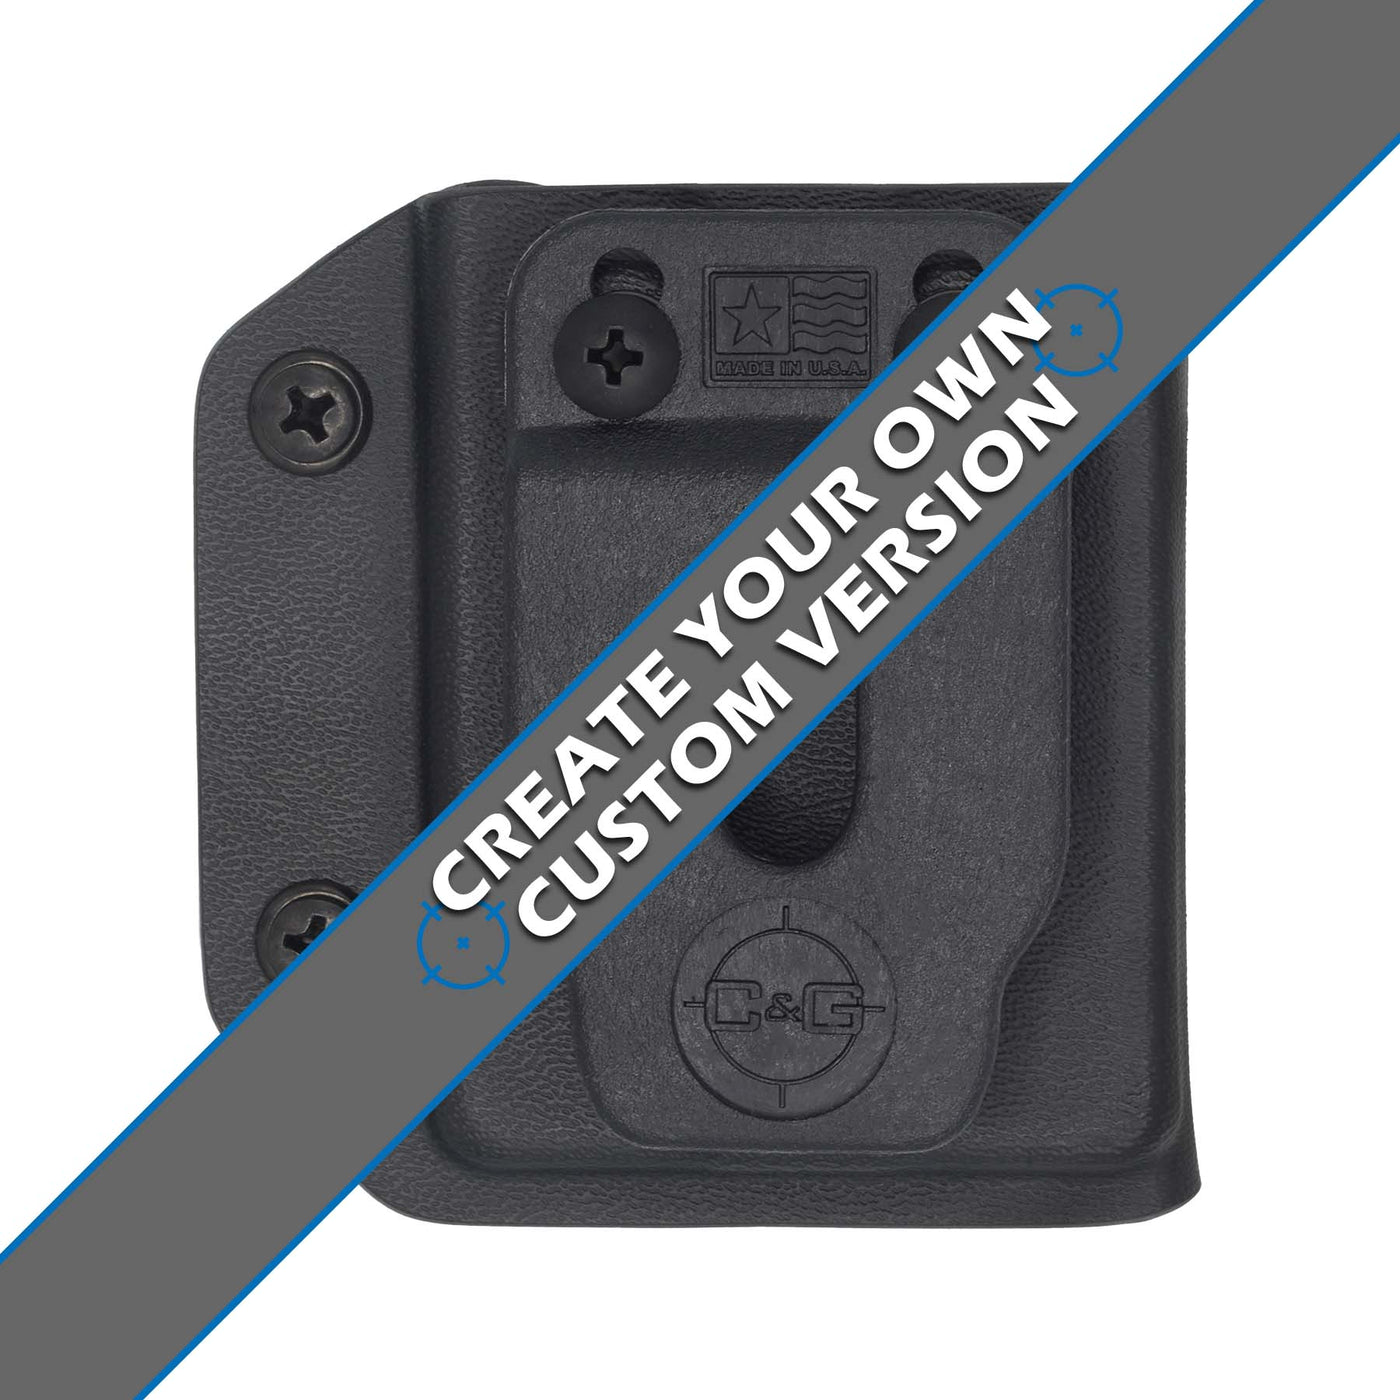 Shown is a custom C&G Holsters universal holster for the Trailblazer LifeCard.